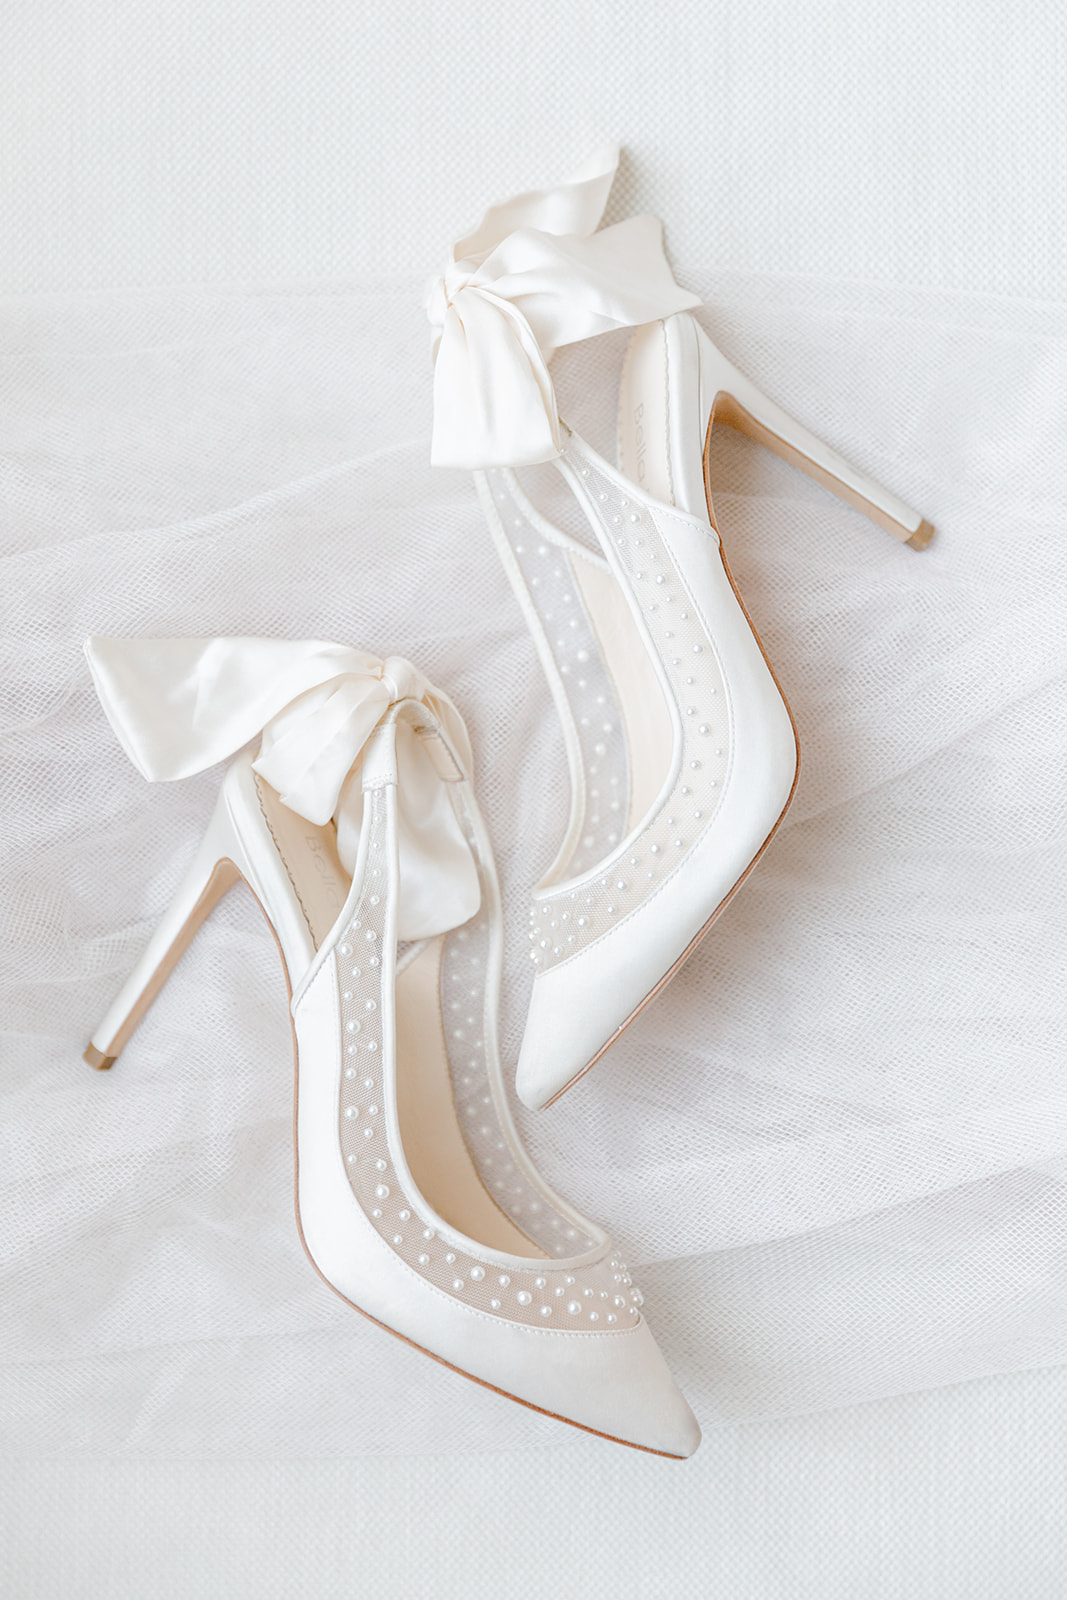 Elegant bridal shoes with bow detail strap designed by Bella Belle Shoes.